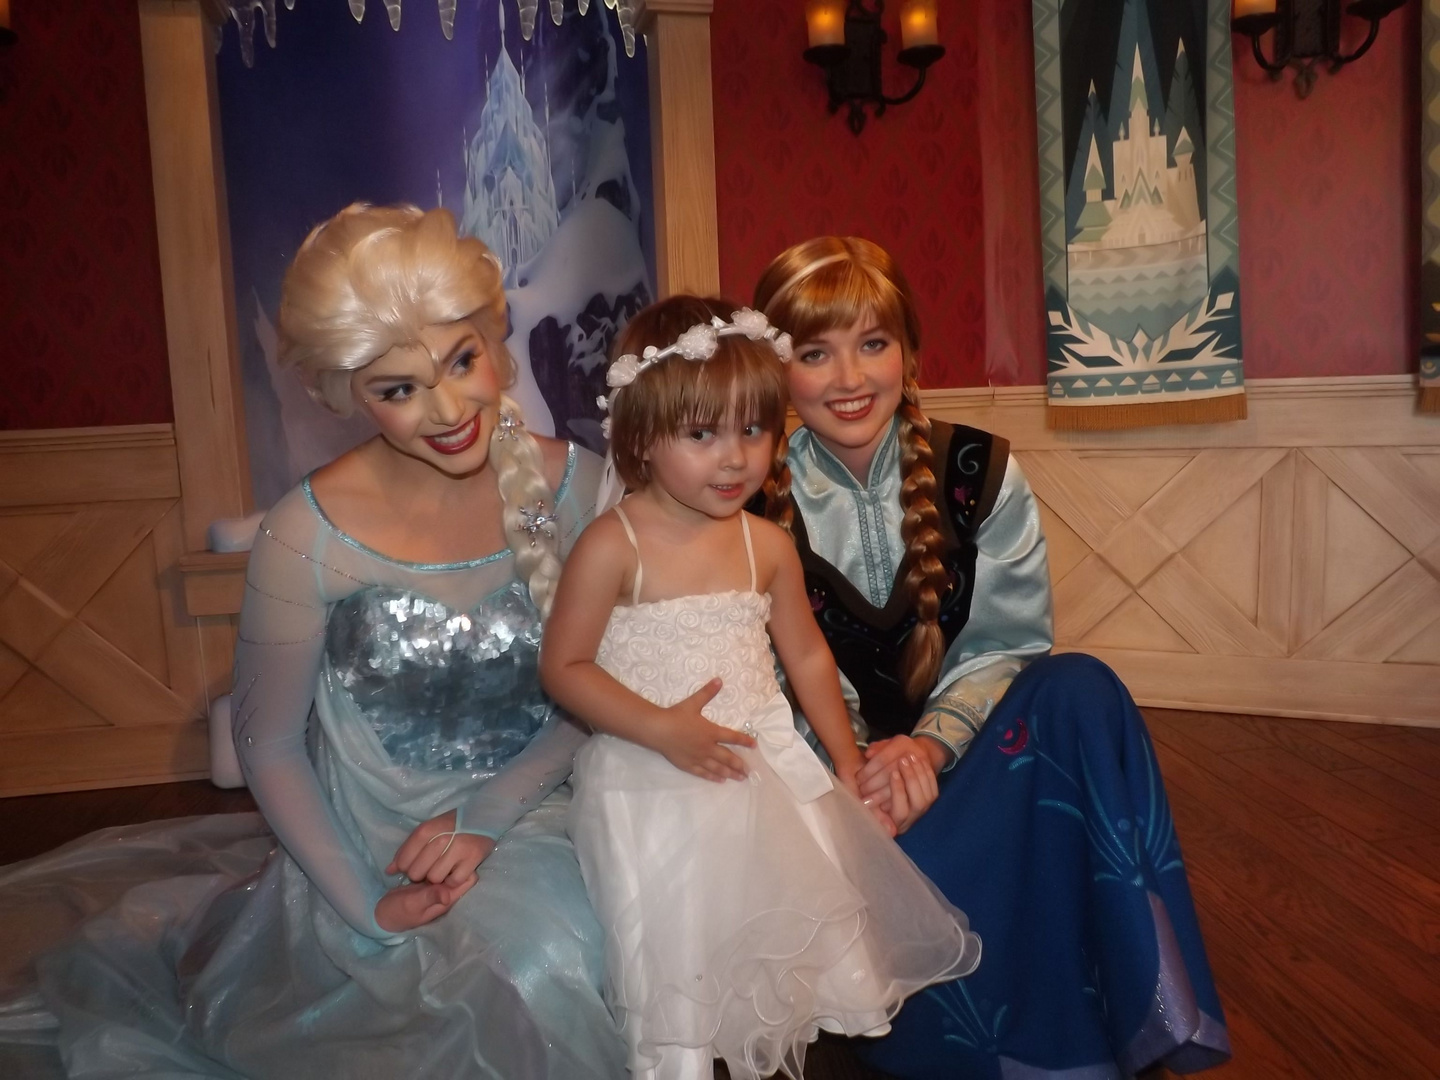 At Disney Land with Anna and Elsa